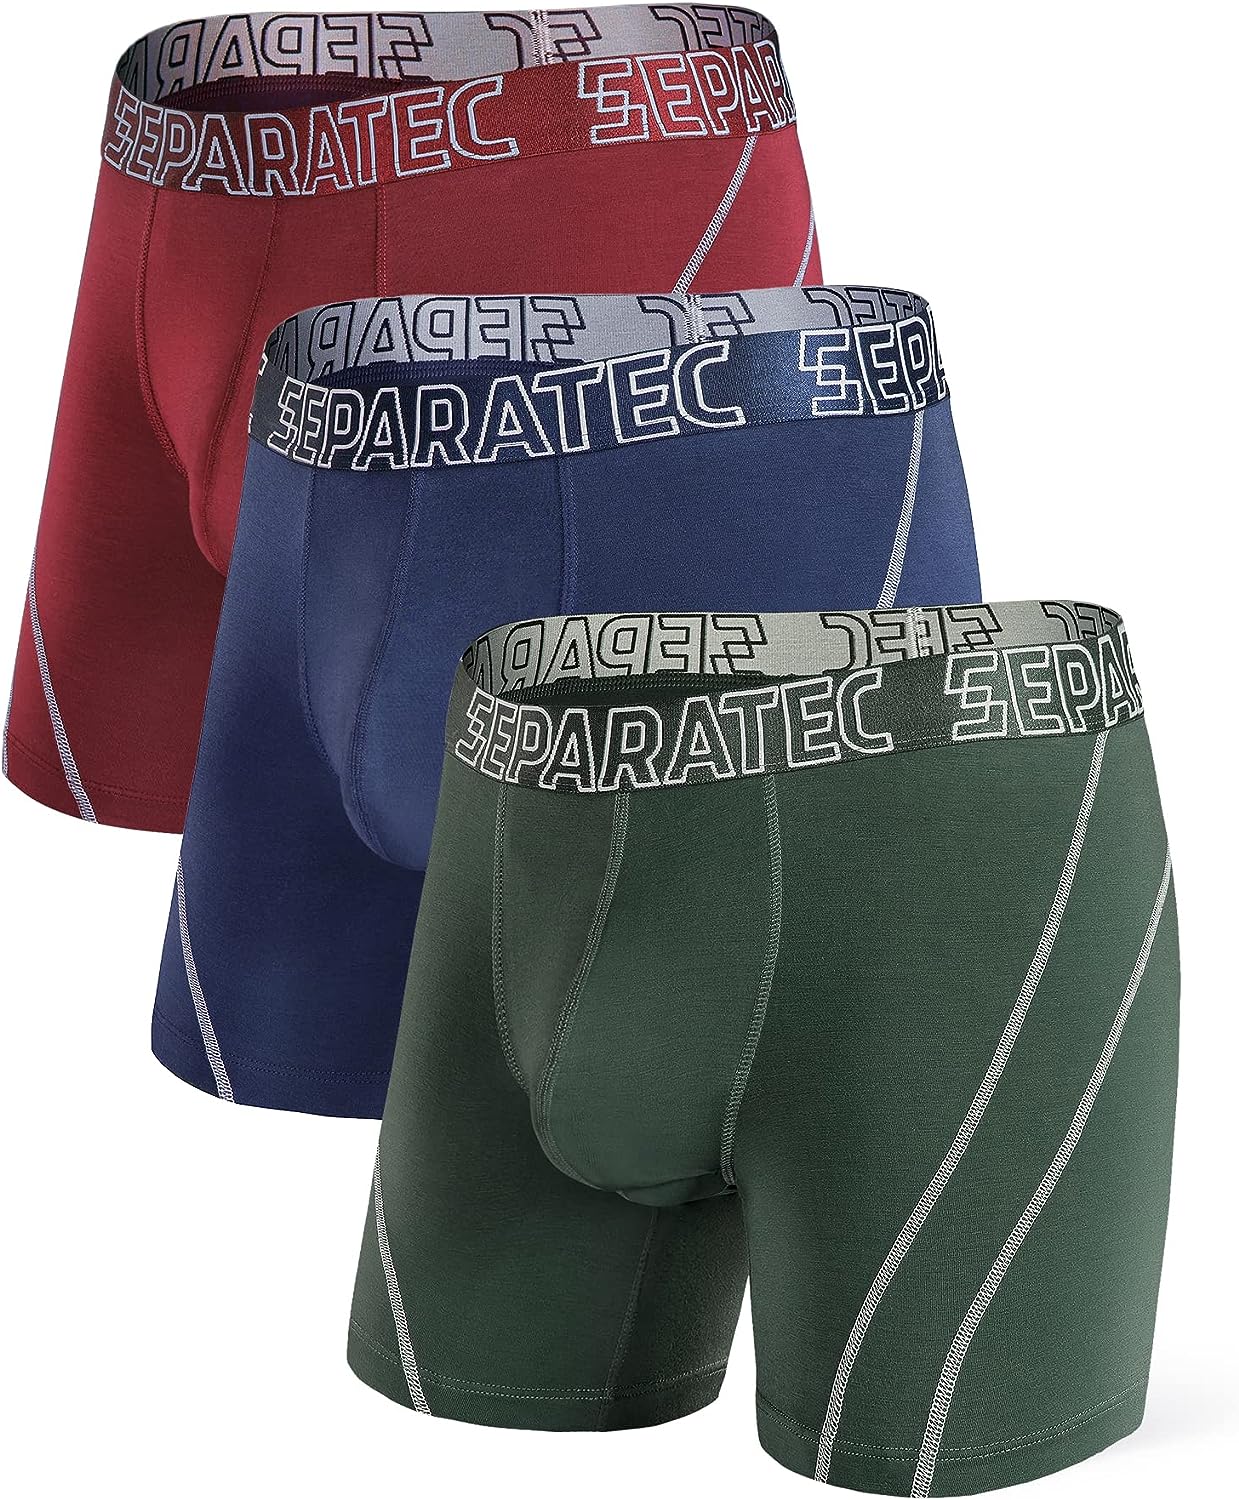 Separatec Bamboo Men's Underwear Classic Soft Breathable Boxer